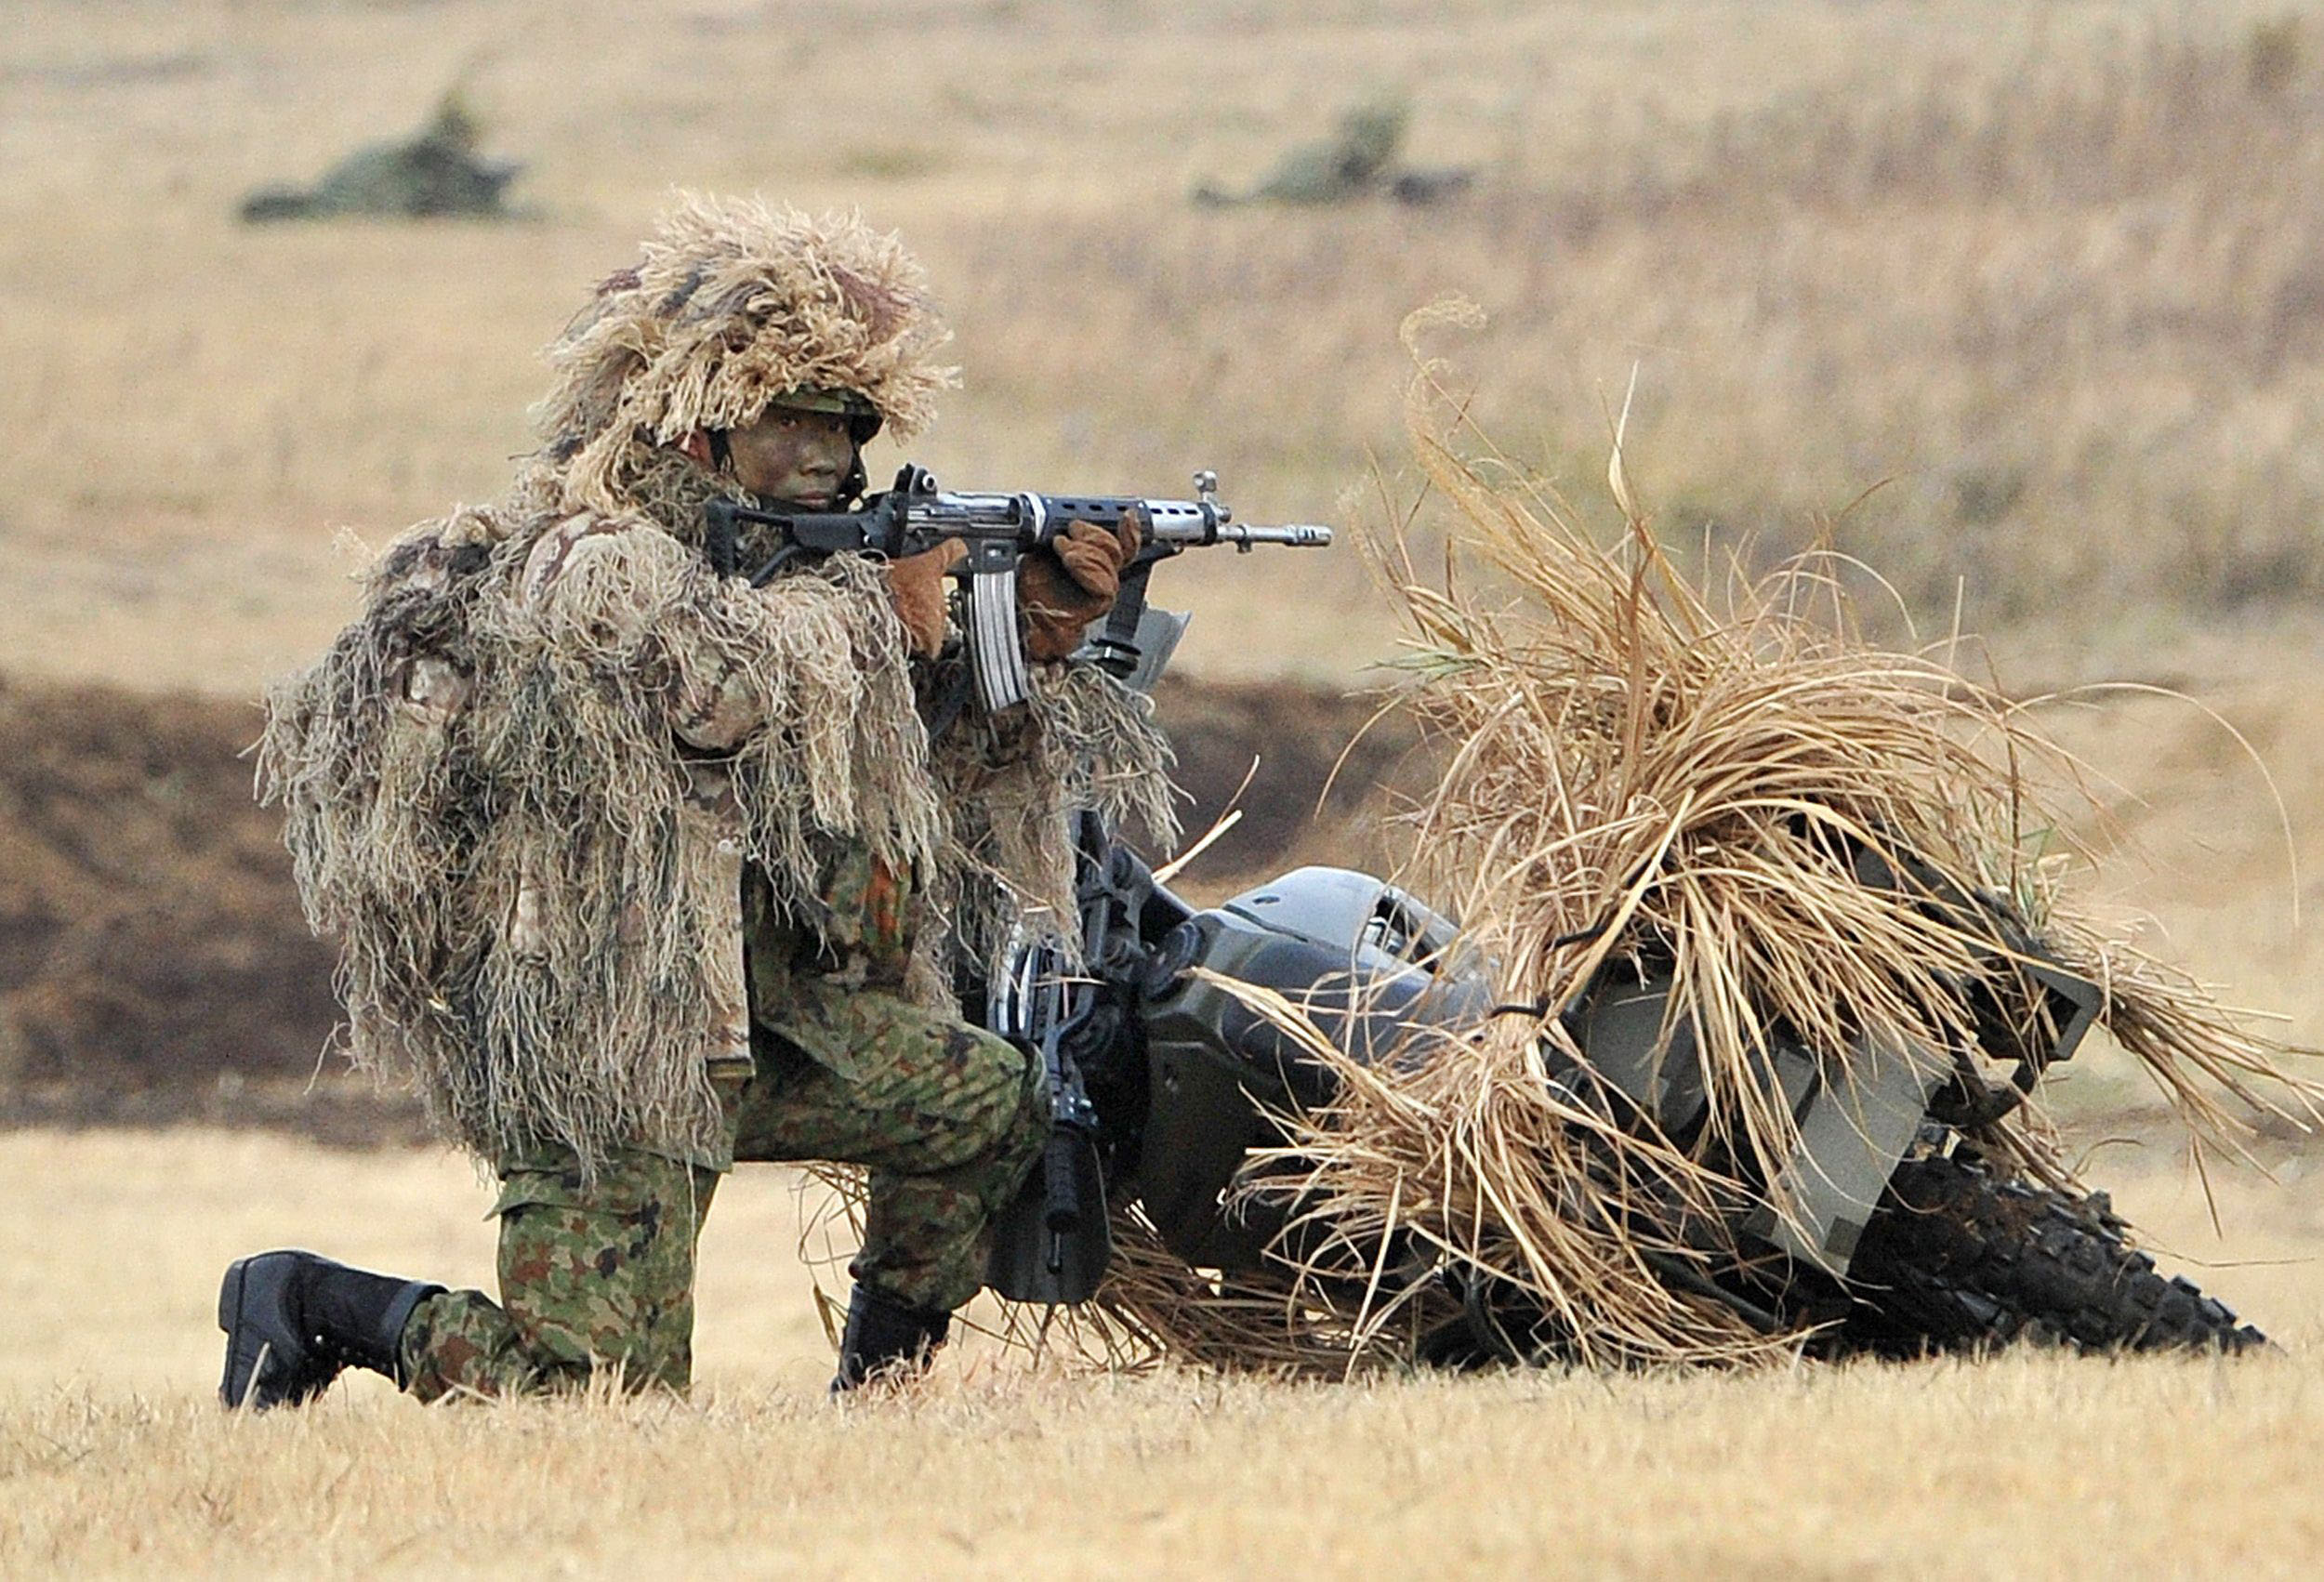 A Ground Self-Defense Force soldier takes aim during a drill in Narashino, Chiba Prefecture, in January 2014. The public is uneasy about the wording of two security bills that would allow Japan's troops to use force abroad for the first time since the war. | AFP-JIJI